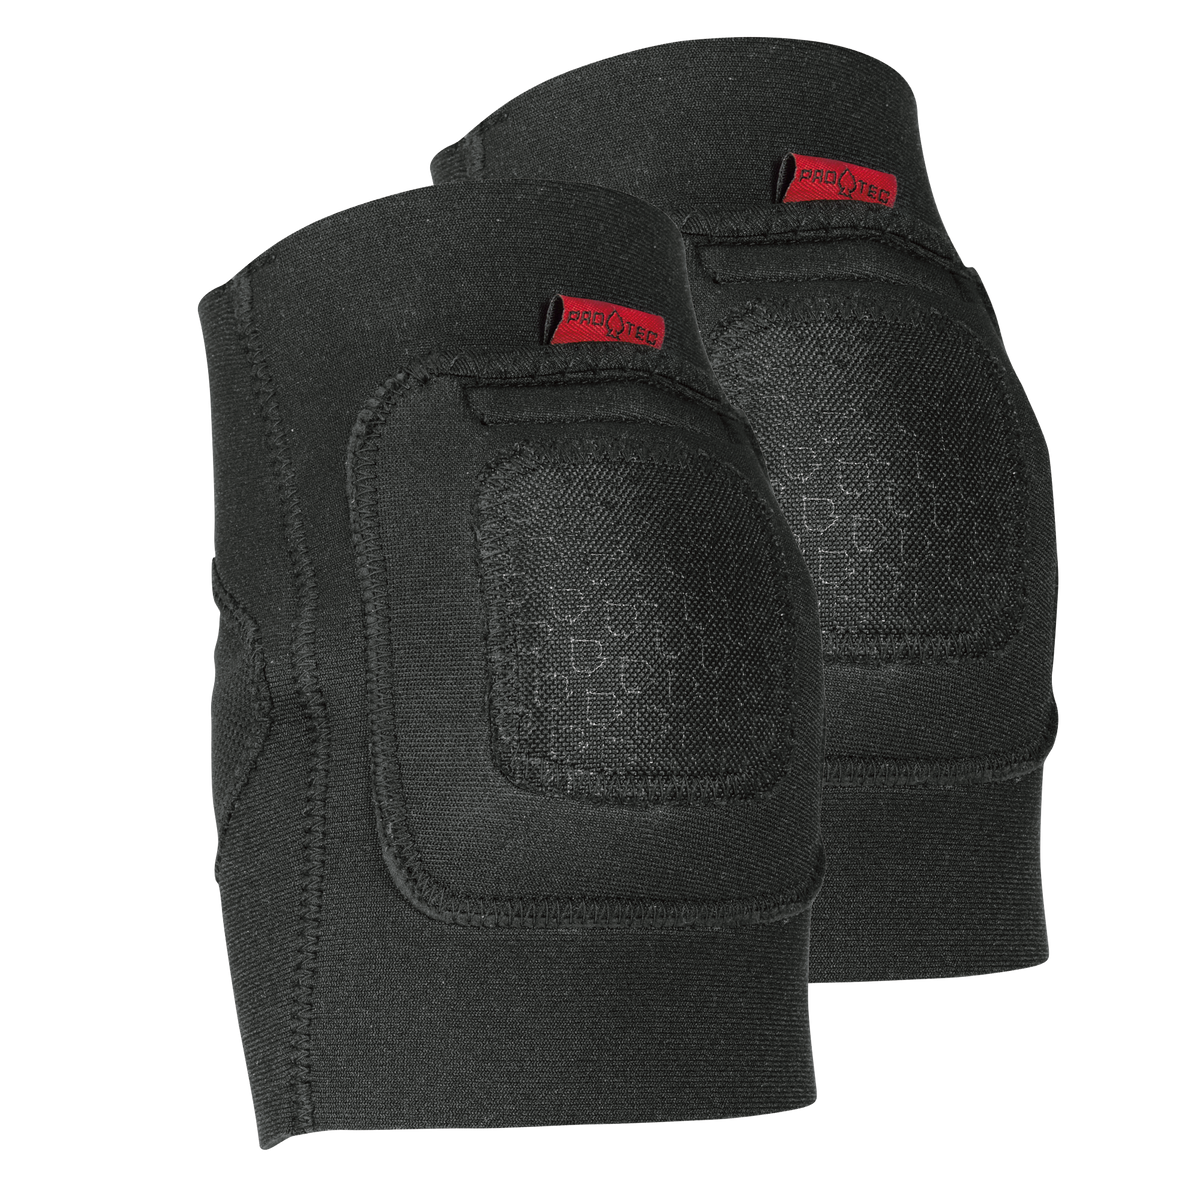 double-down-elbow-pad